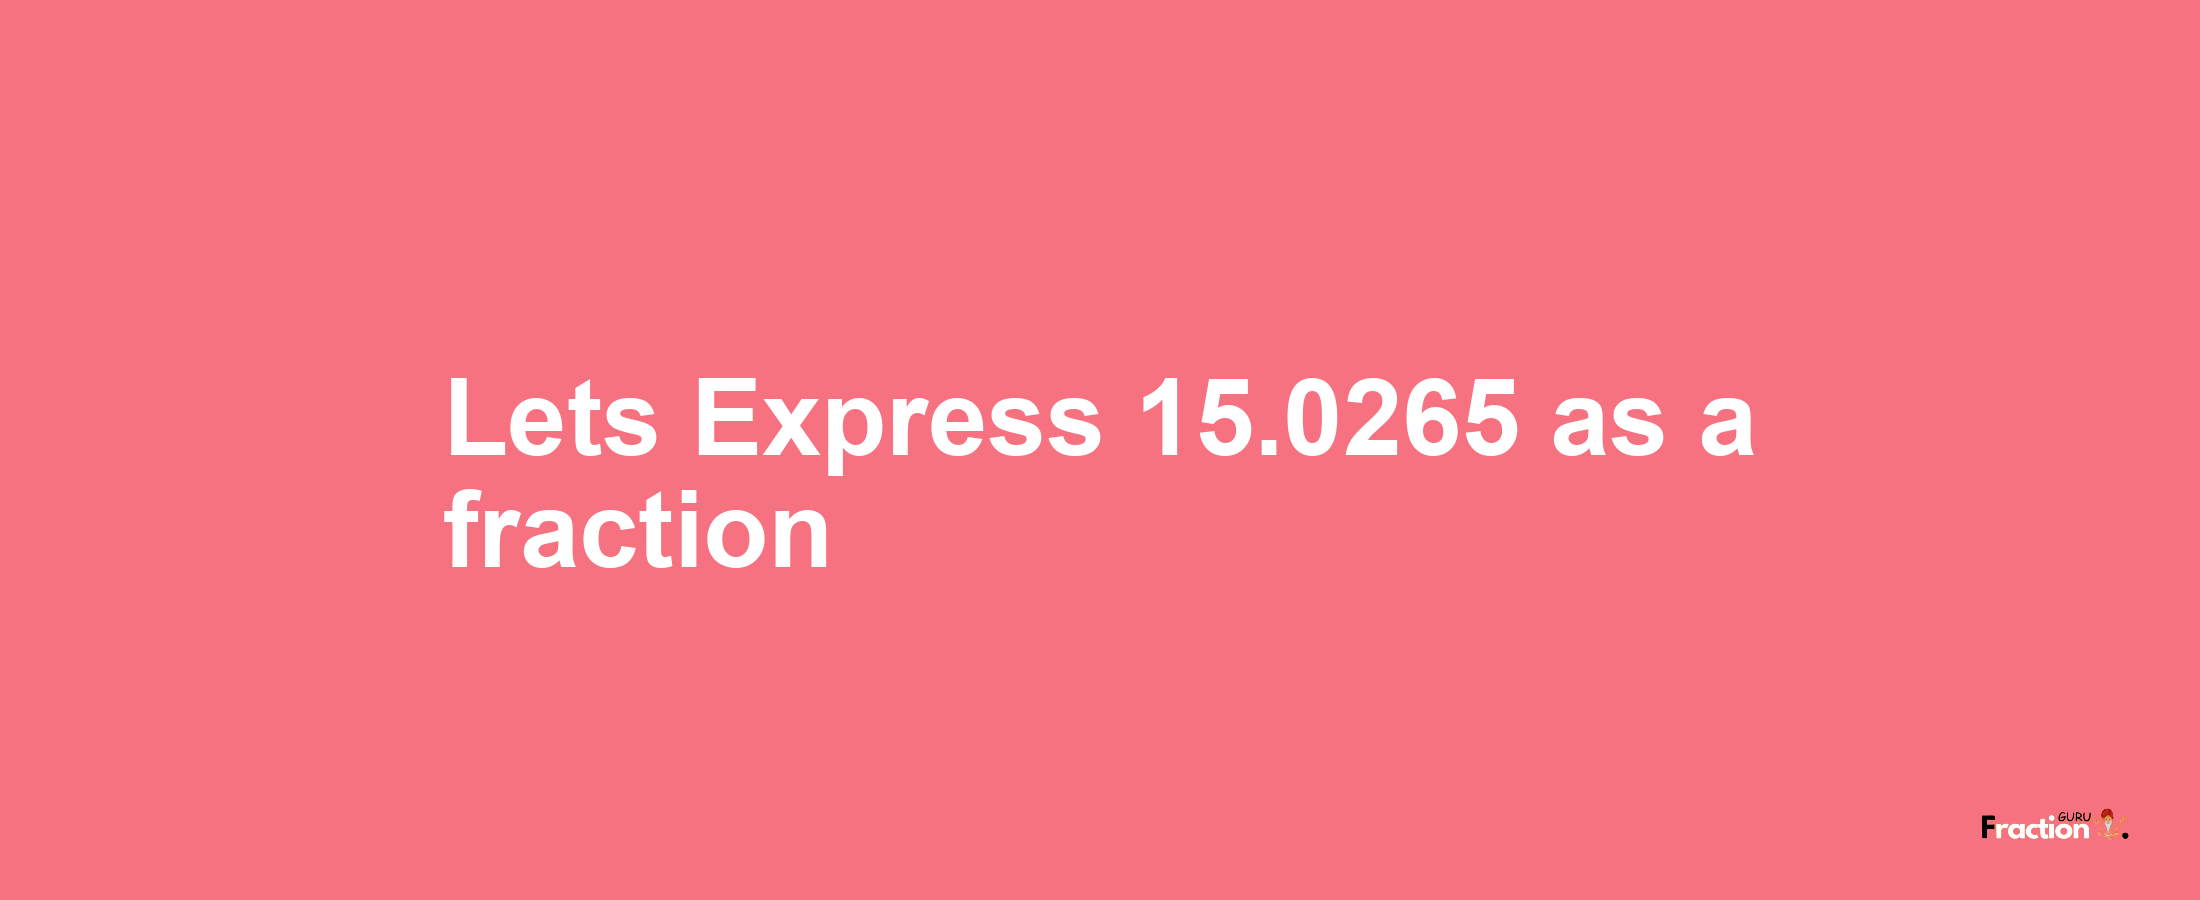 Lets Express 15.0265 as afraction